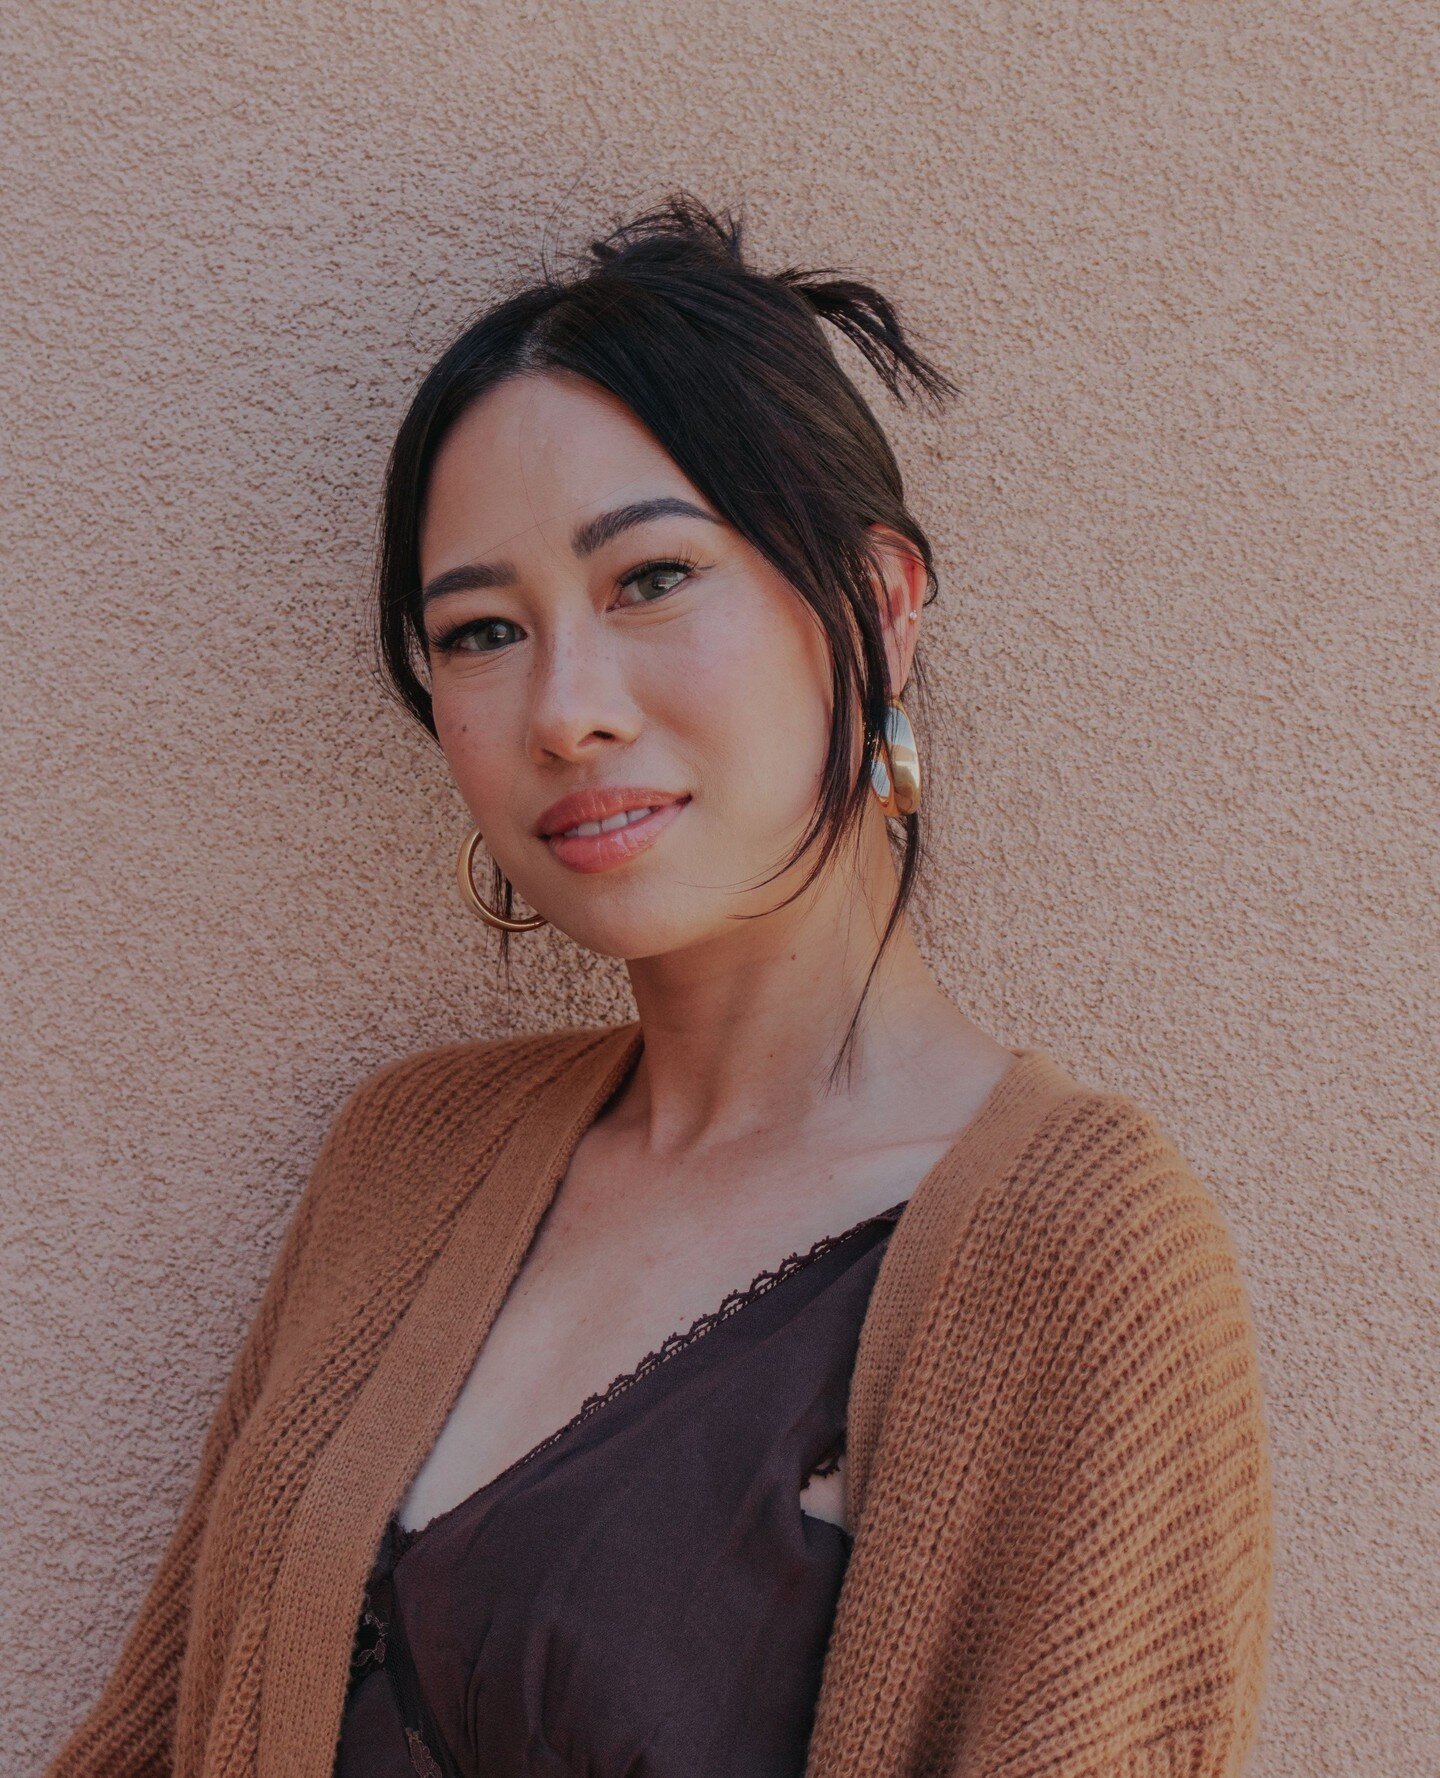 Takeover Thursday featuring our own Ngoc Swann! Specializing in Brow Lamination, LashLift, Brows, and Lash Tints, and targeted waxing services. Head to our story today to get to know more about her and what she offers! ✨🌿⁠
⁠
@ngocswannaesthetics 
⁠
